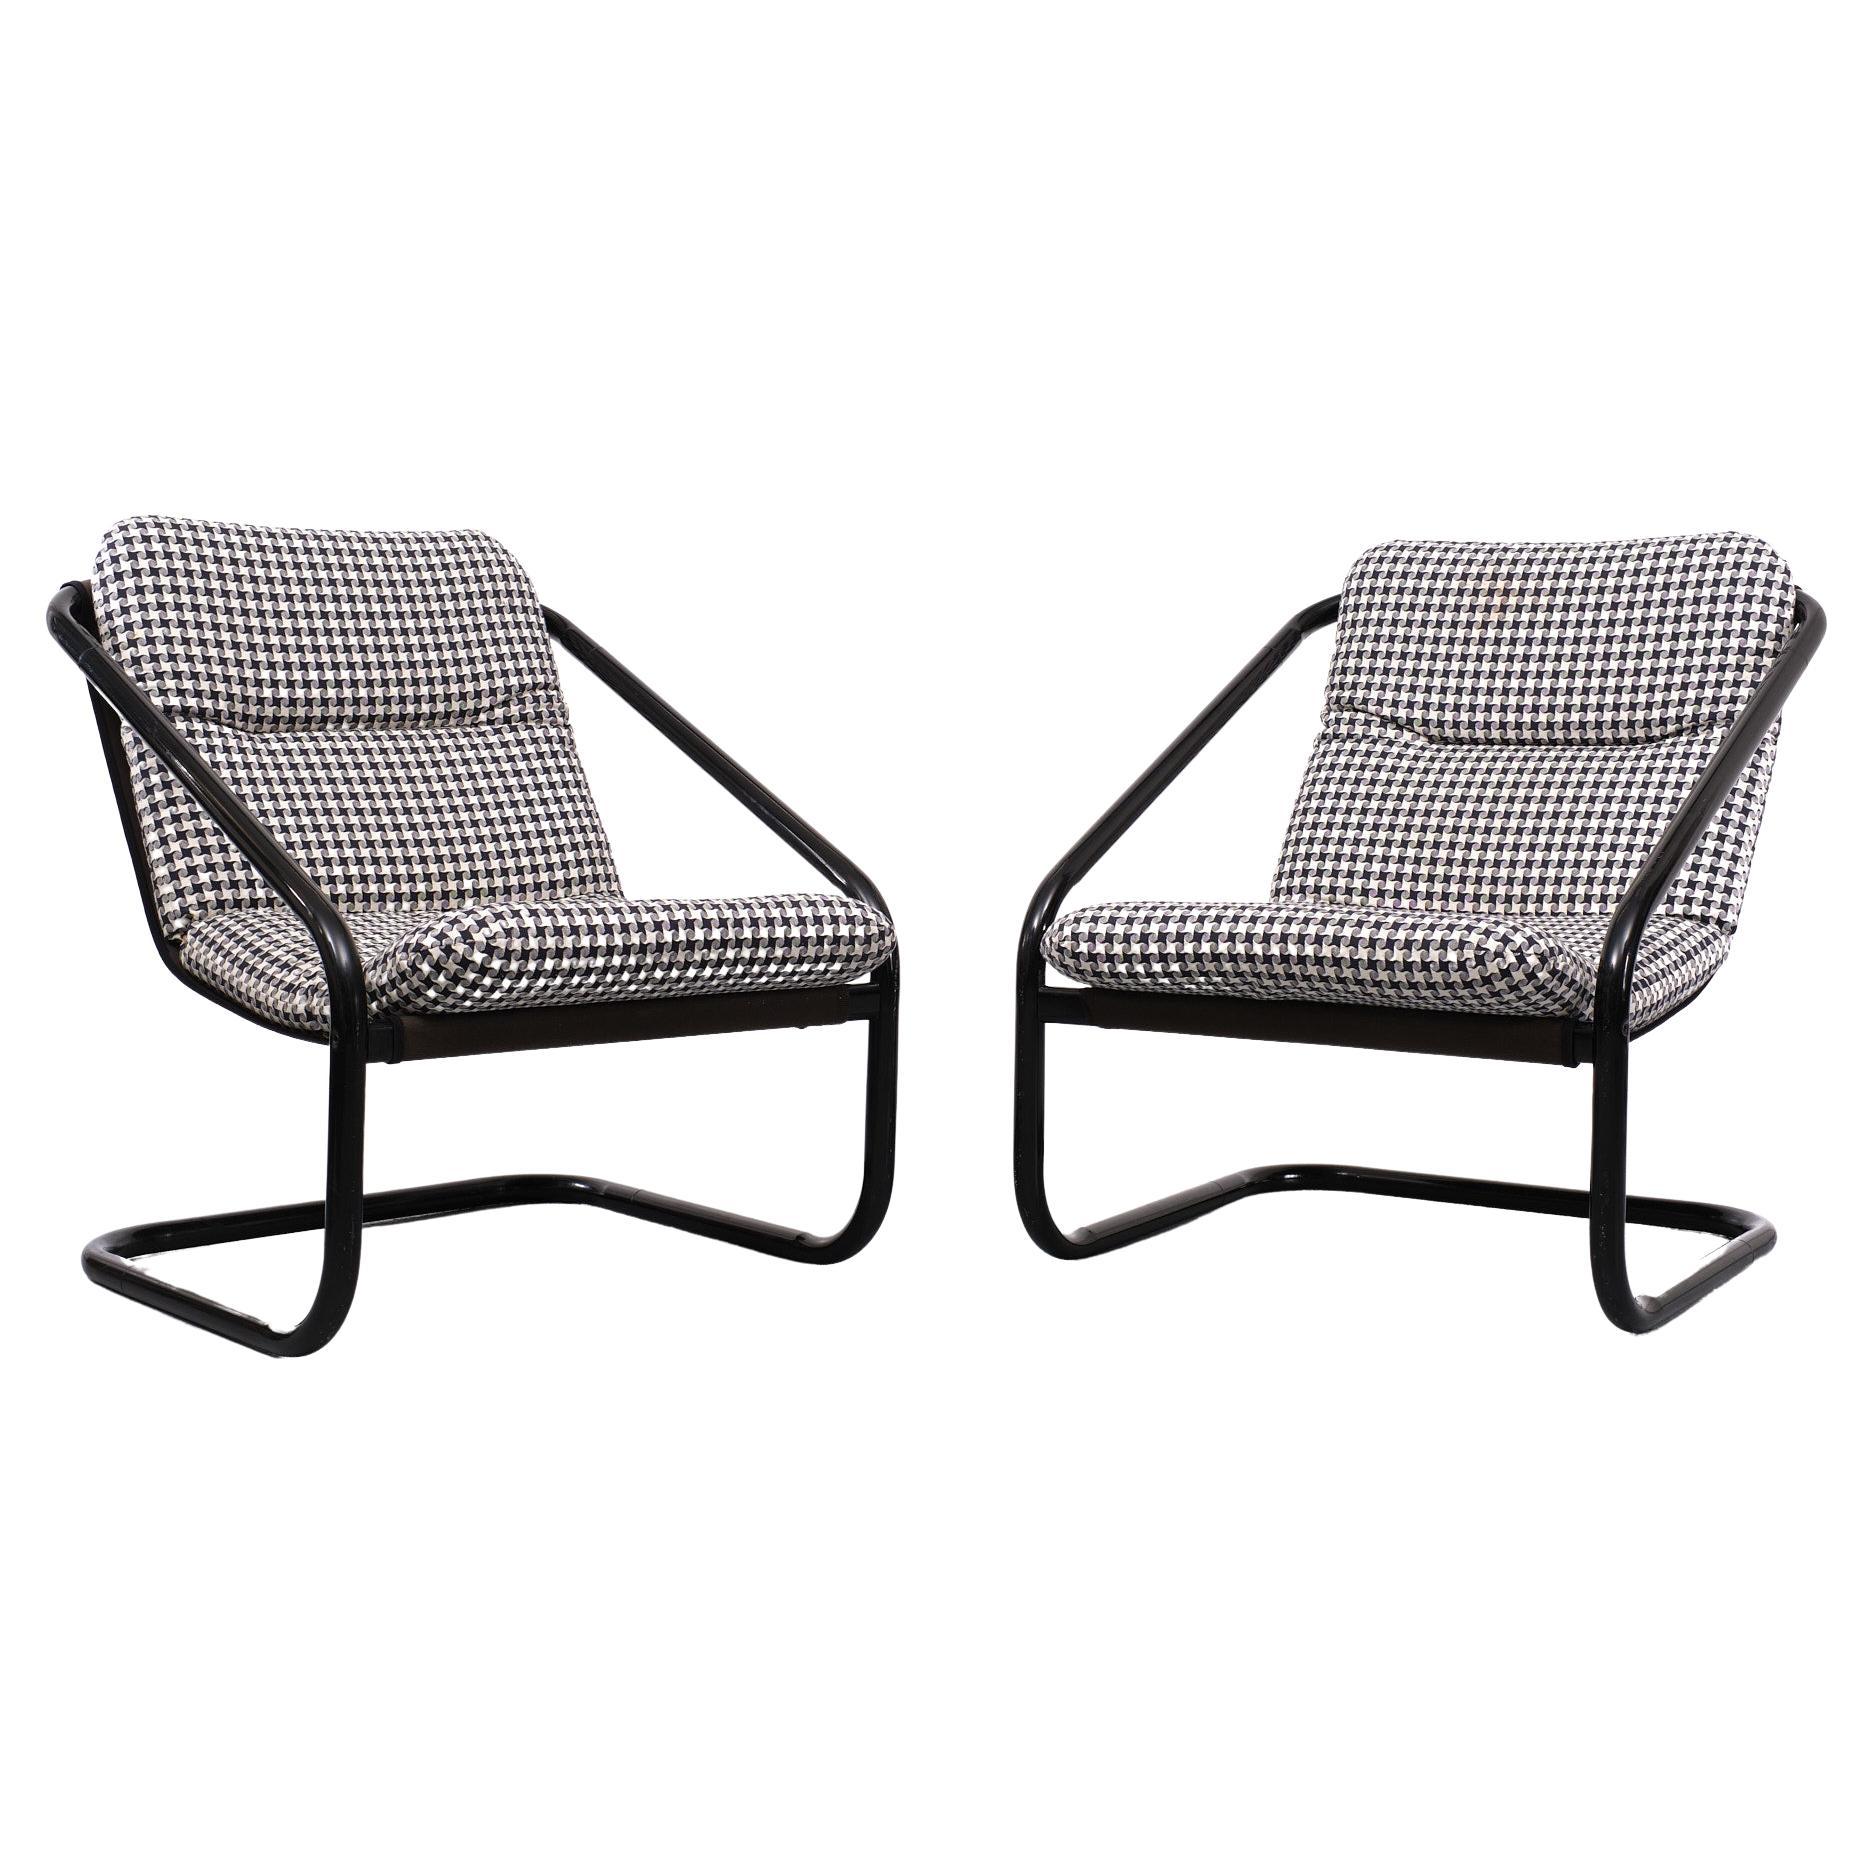 Two Tube frame lounge chairs .Comes with the original cushions. like the
Pop art print on these , good condition . on a Canvas base .  These Chairs are 
demountable , so very easy to send around the World . Very light . 

Please don't hesitate to